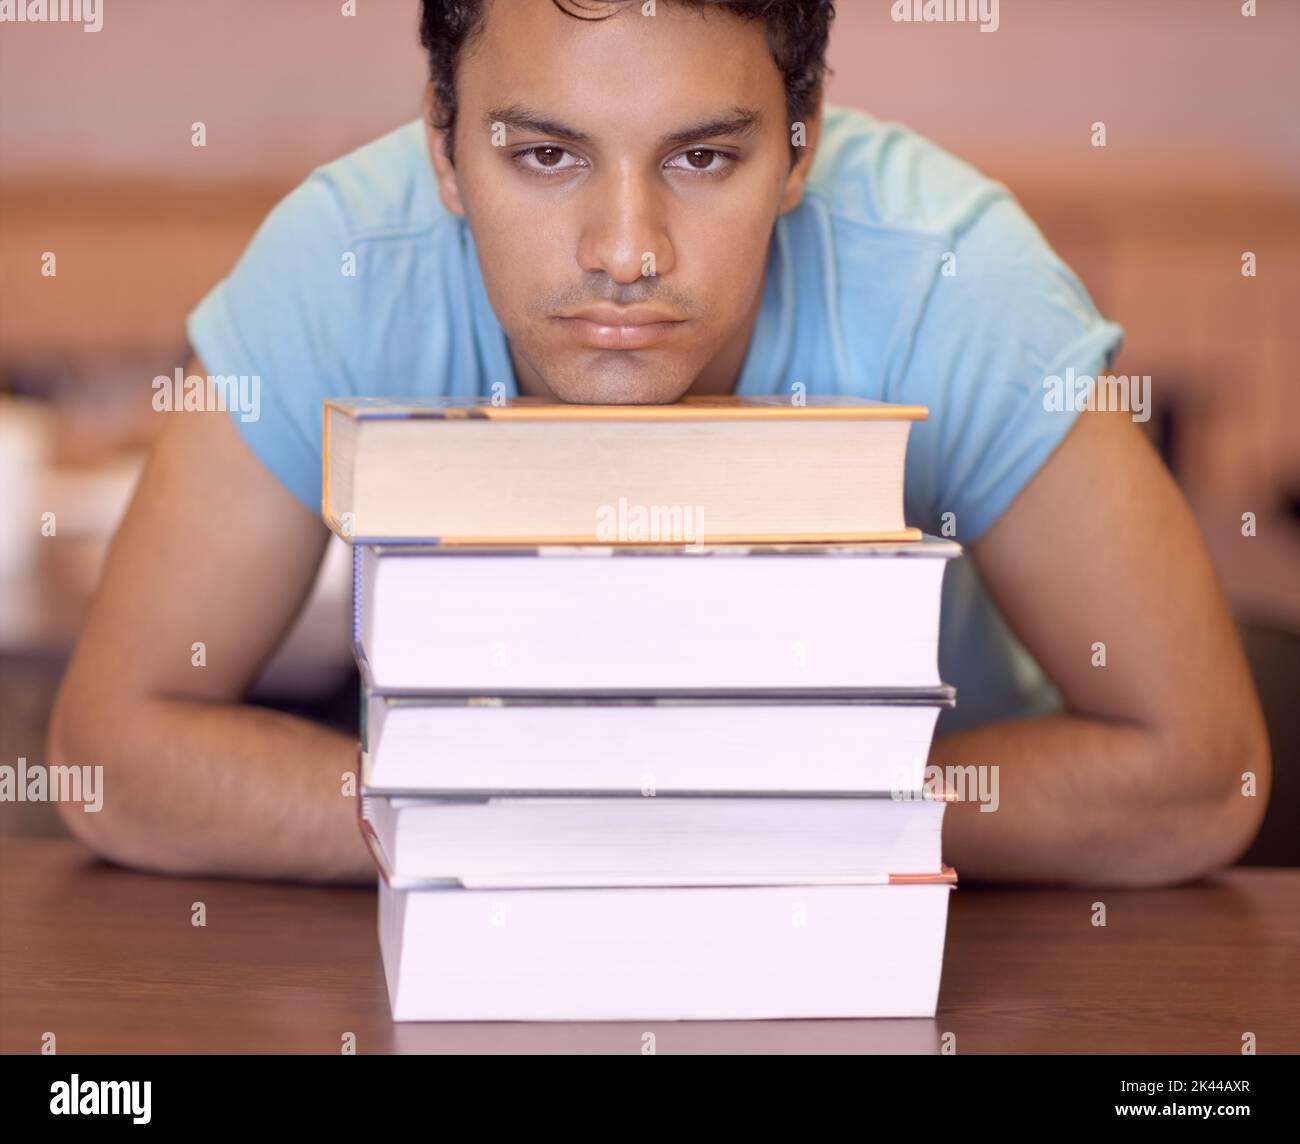 So much to study. Portrait of a young man looking bored while resting his head on some textbooks. Stock Photo